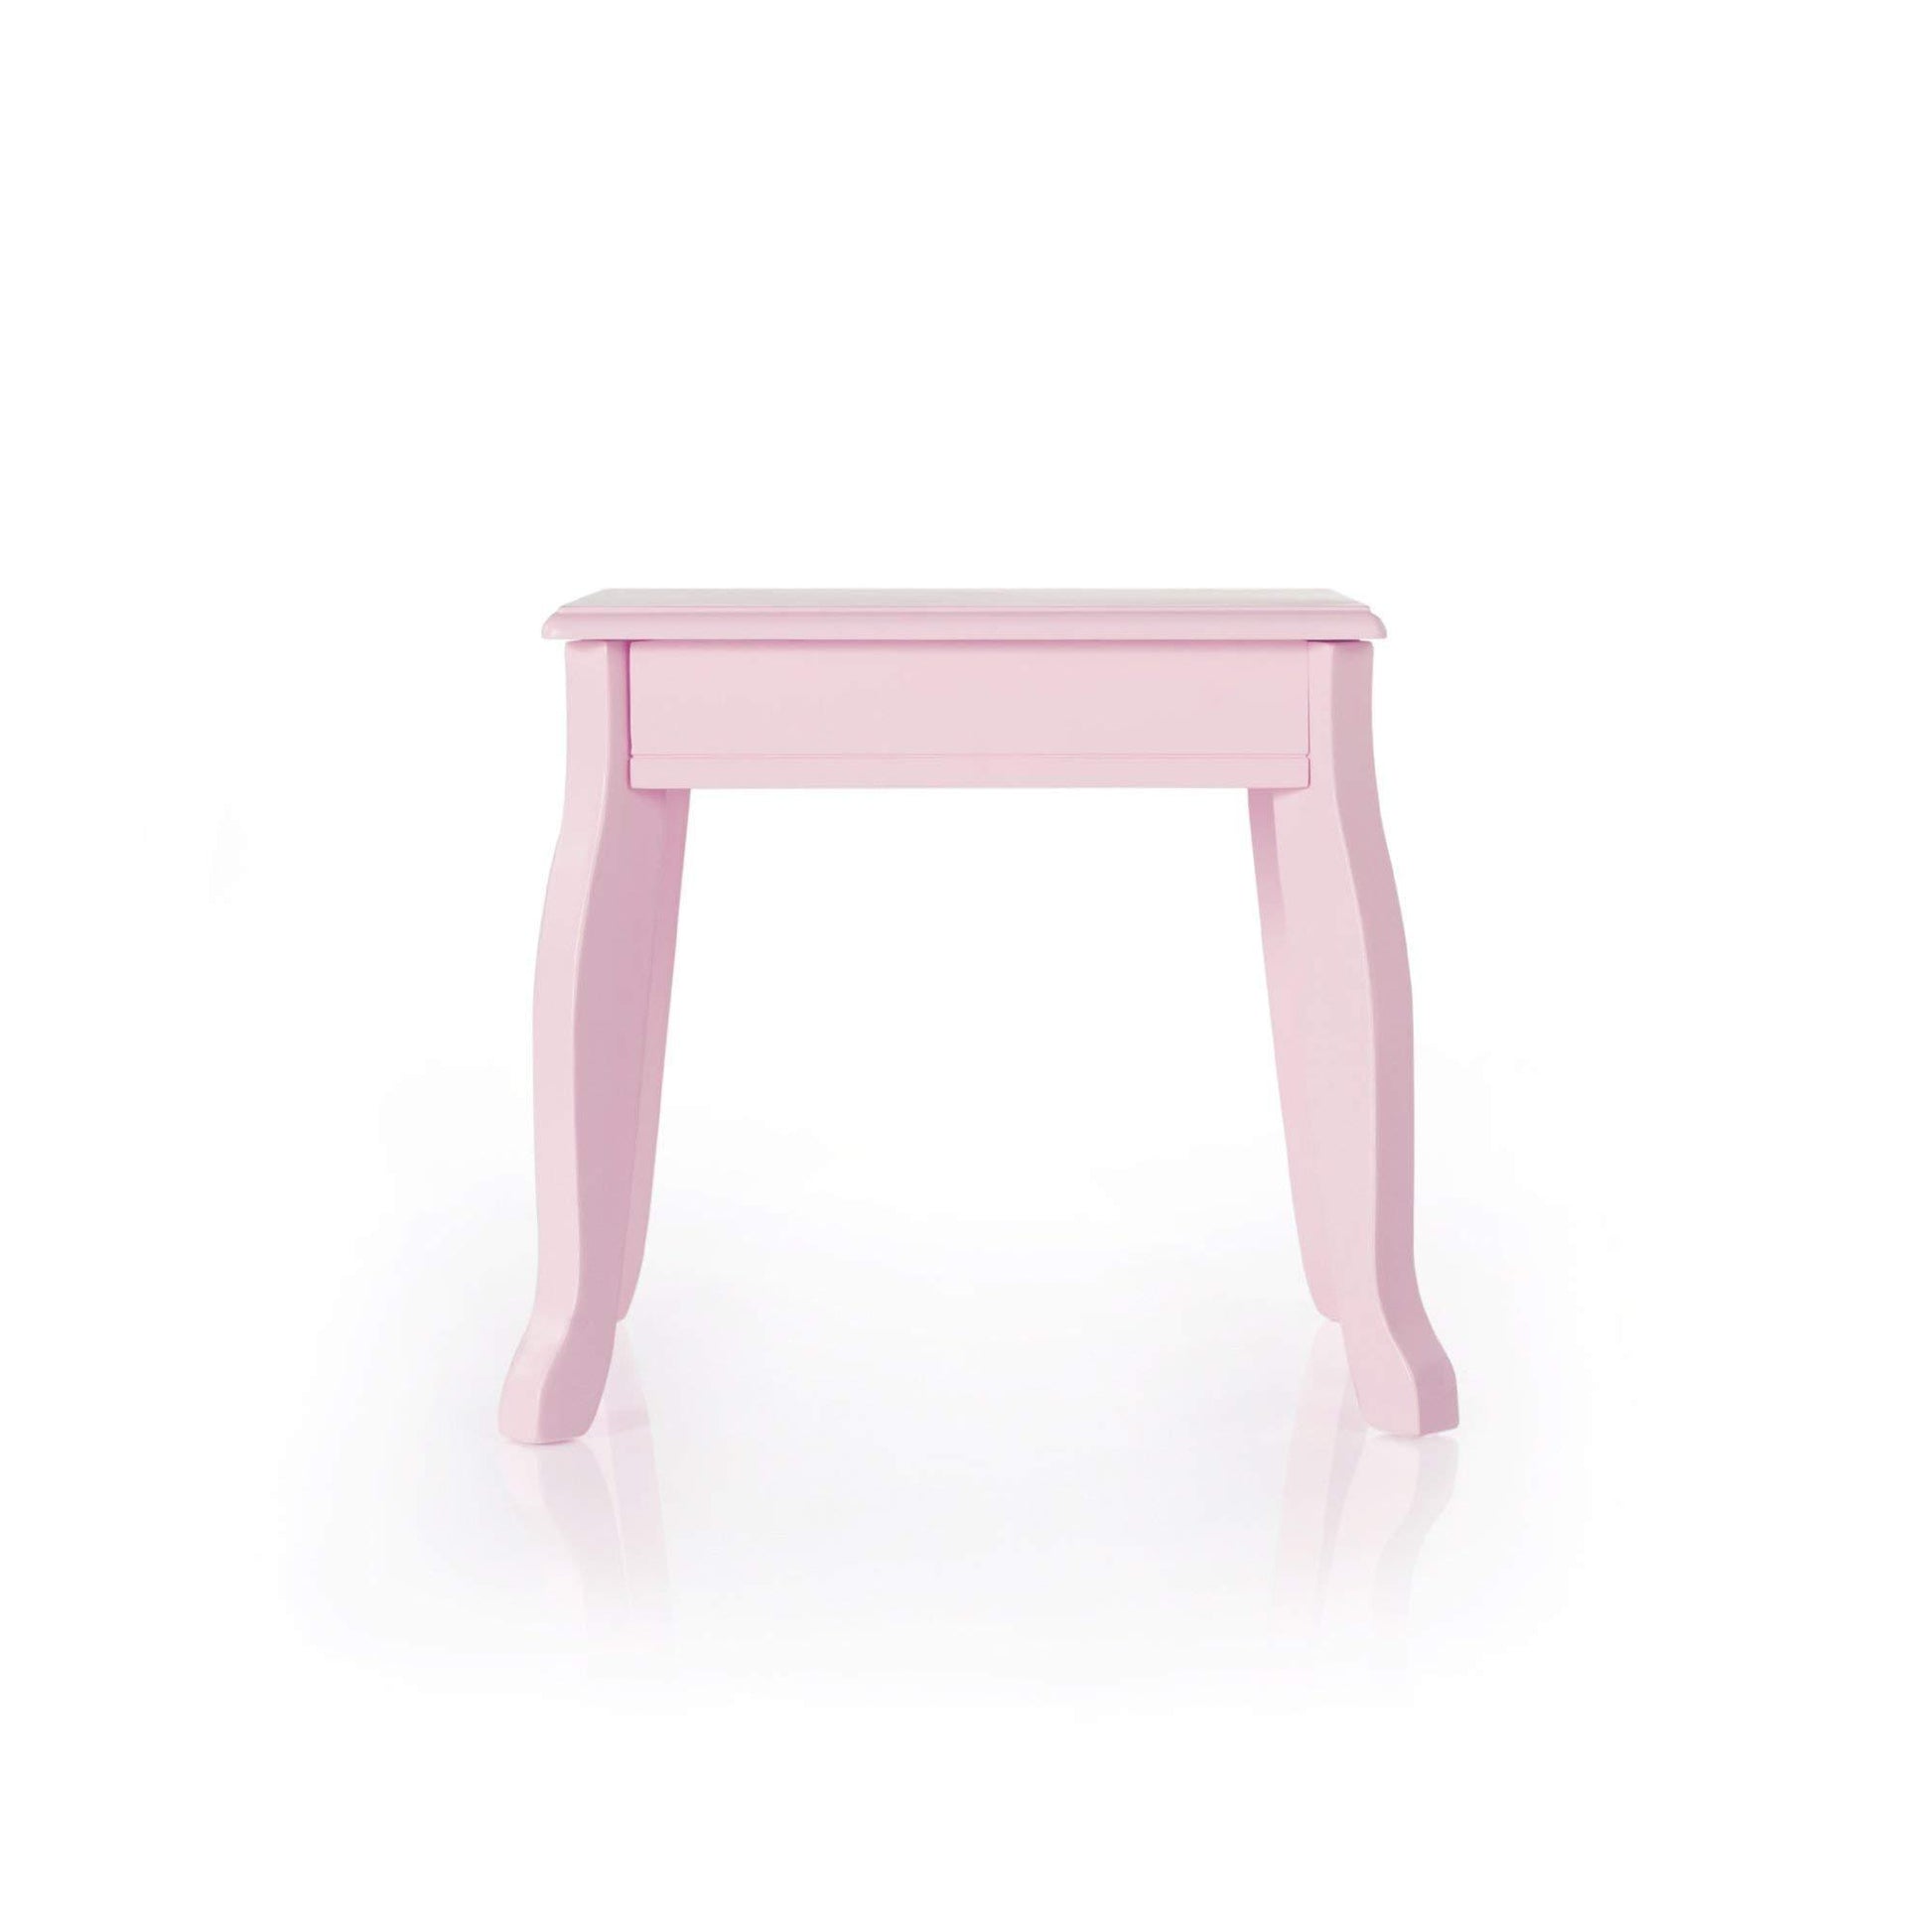 Select nice guidecraft vanity and stool pink kids wooden table and chair set with 3 mirrors and make up drawer storage for toddlers childrens furniture